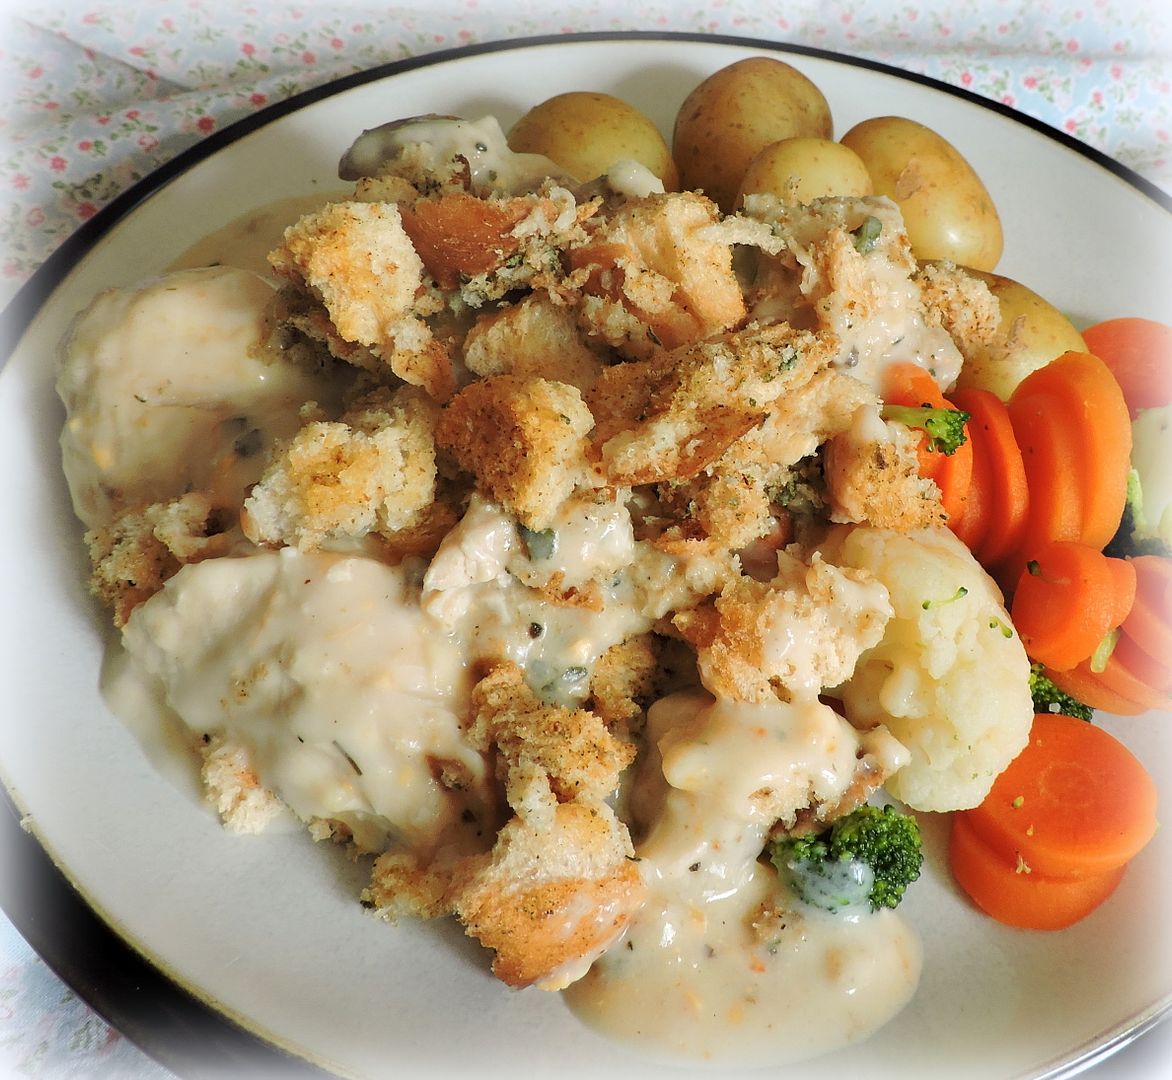 The English Kitchen: Crock Pot Chicken and Stuffing